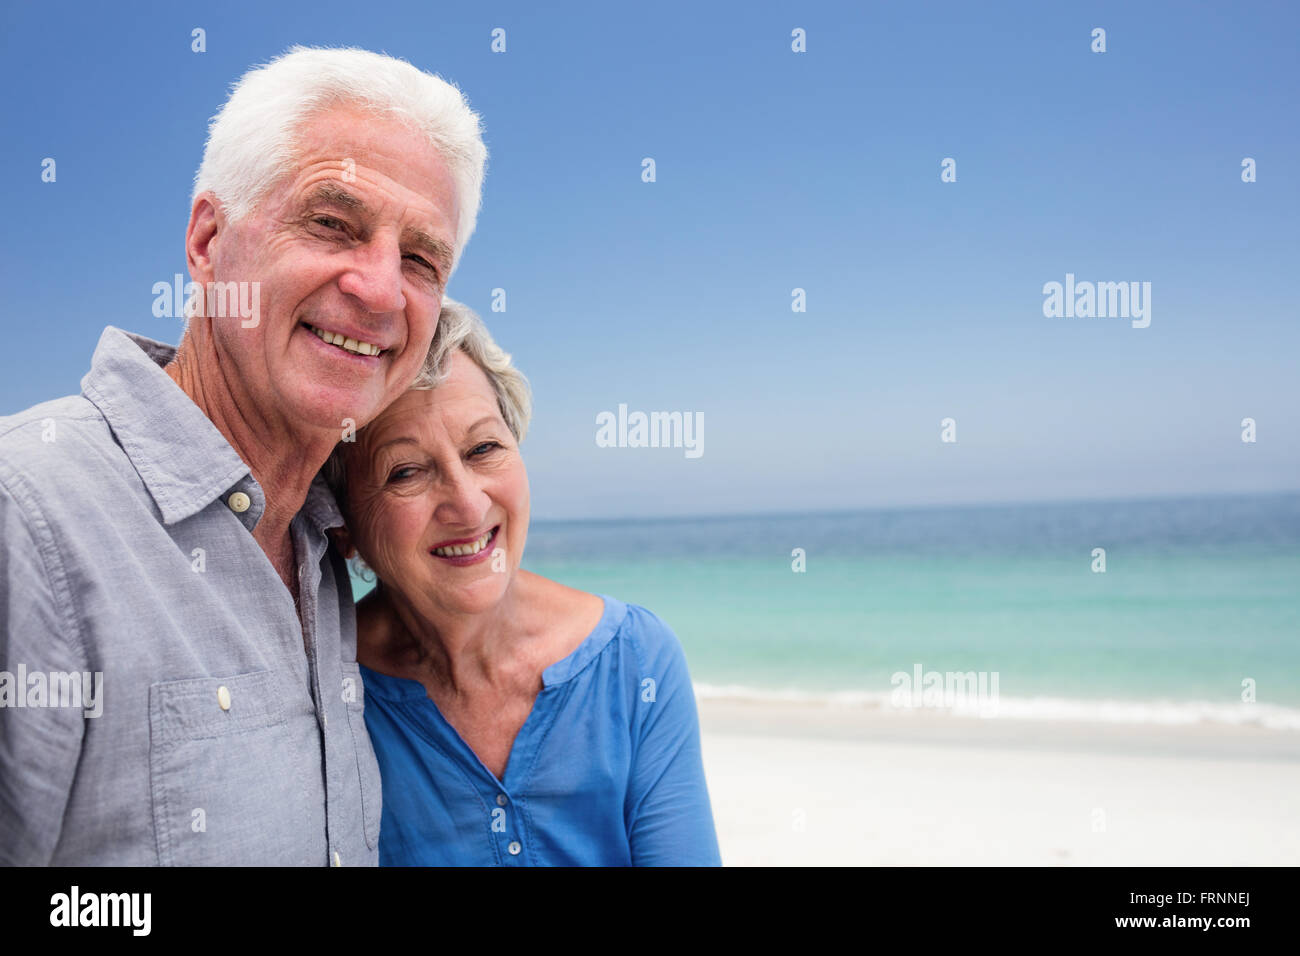 Portrait of senior couple embracing each other Stock Photo